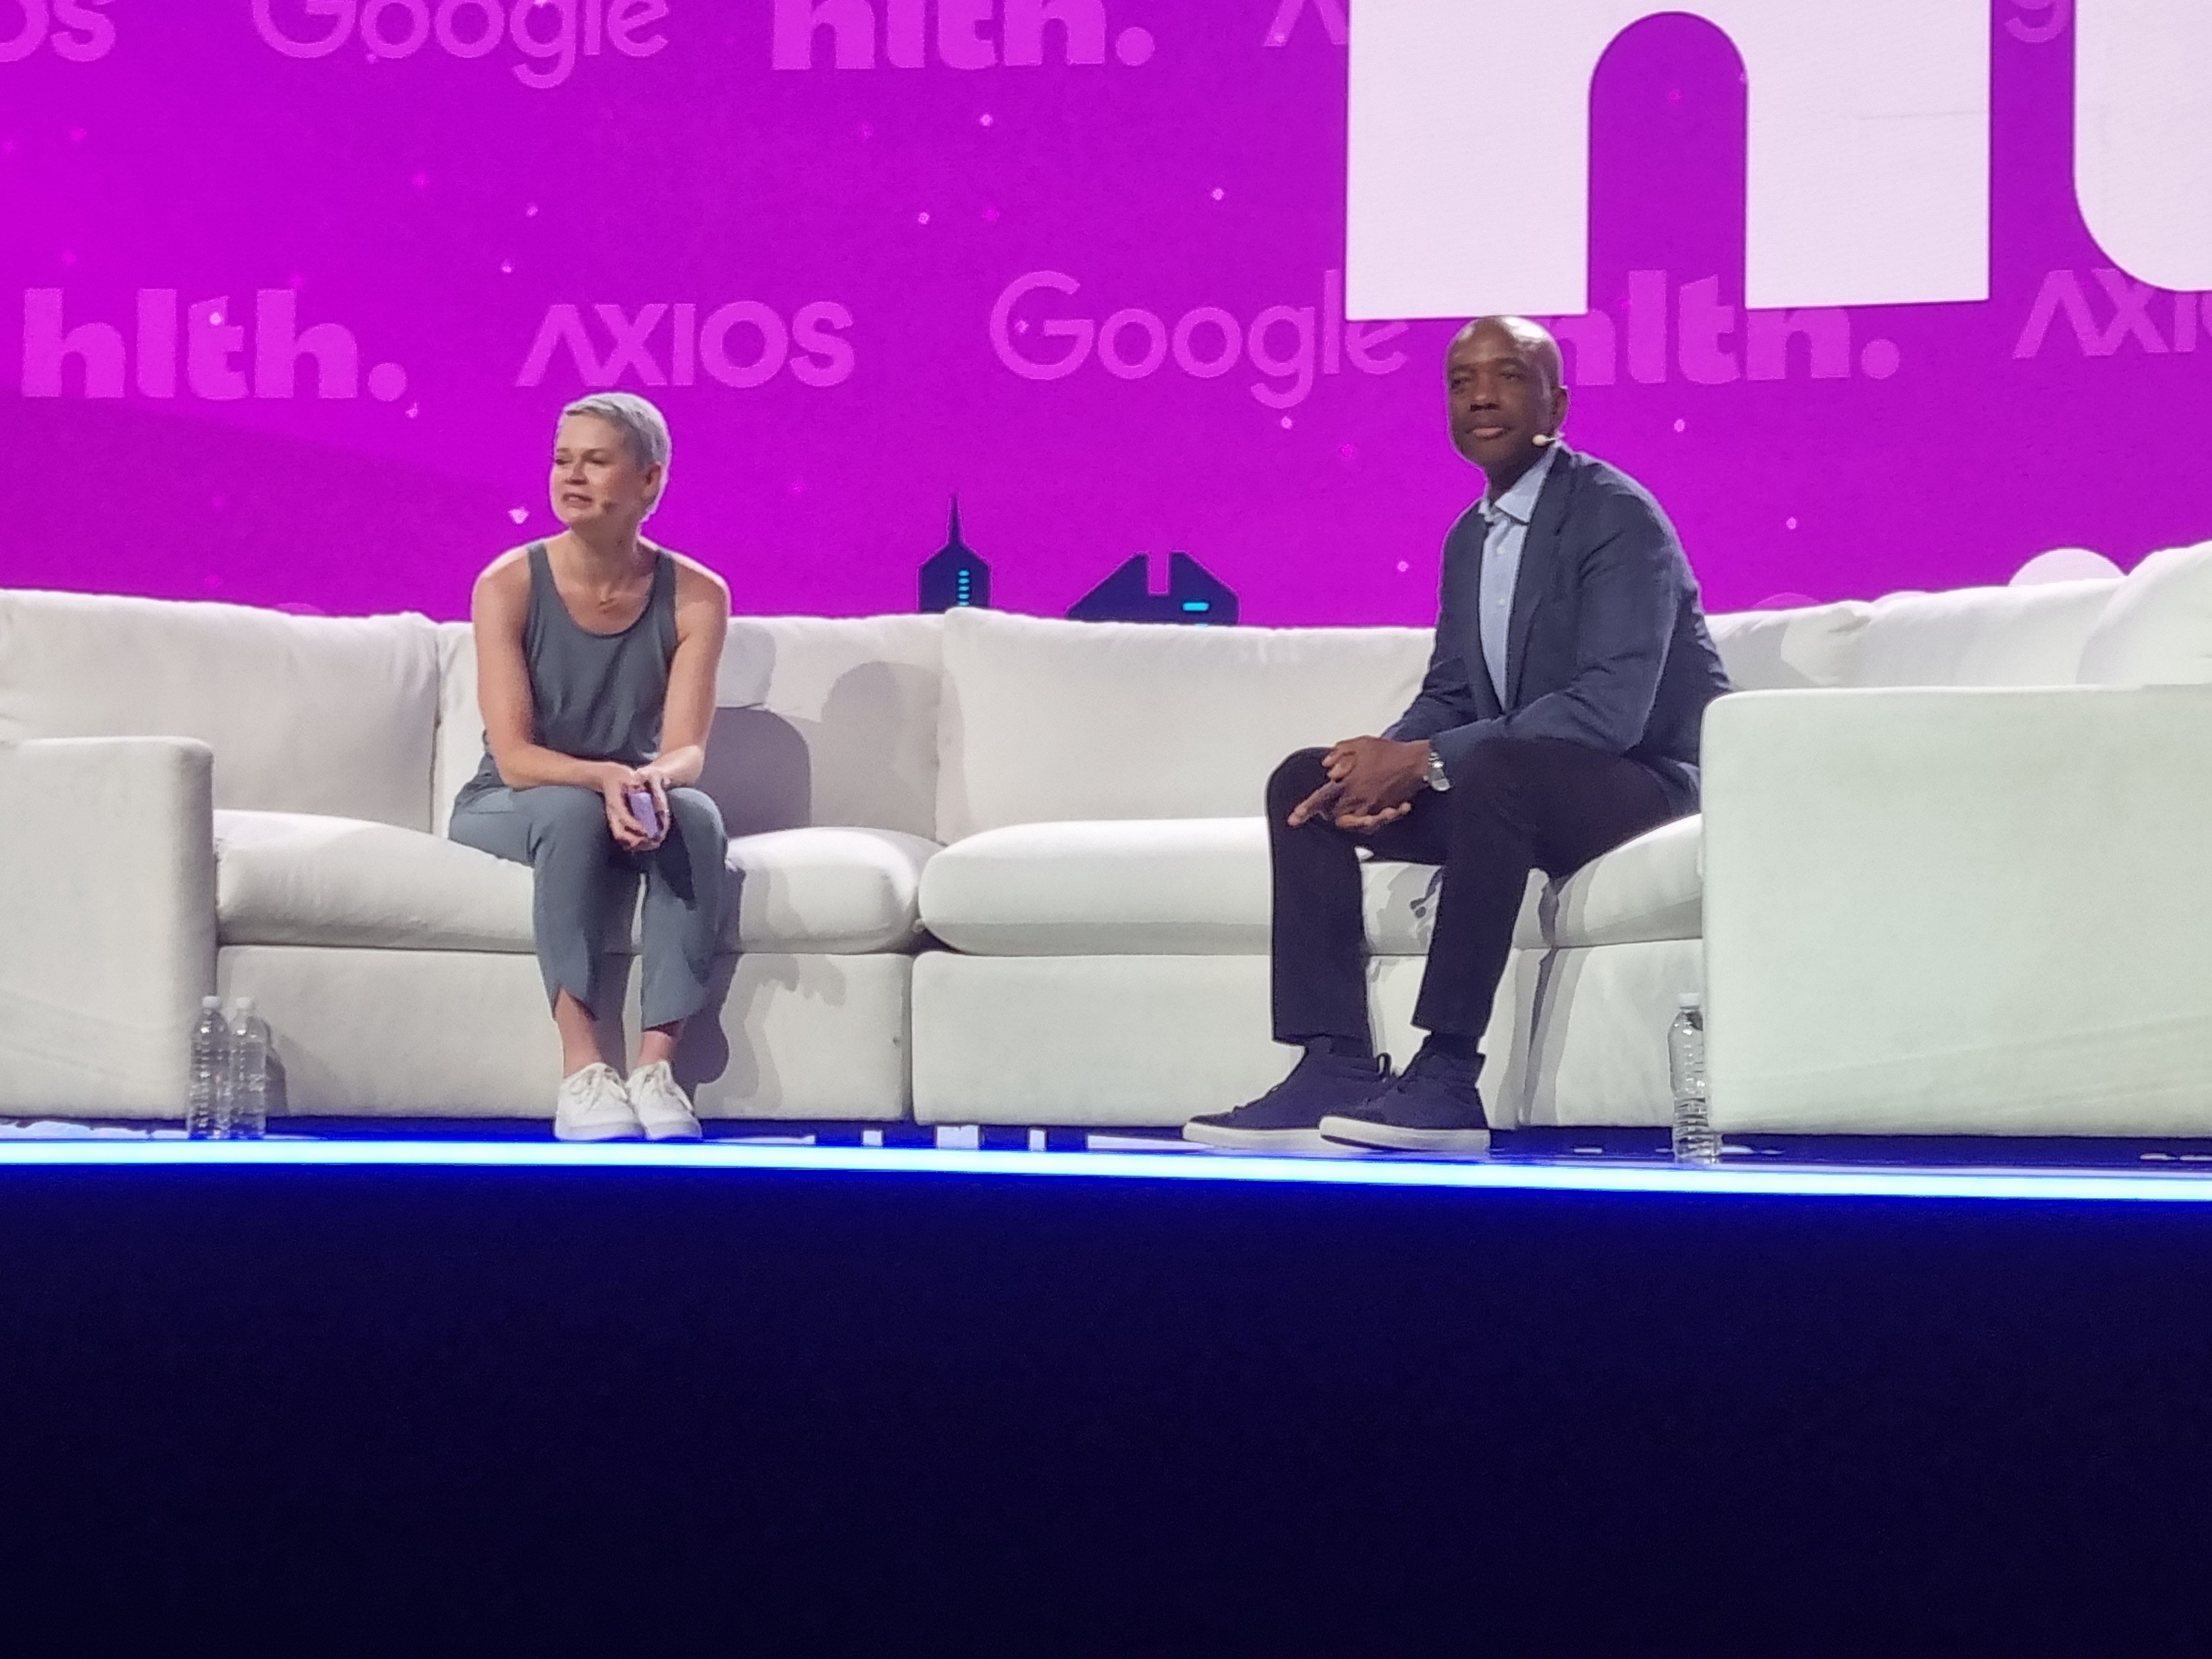 James Manyika of Google, interviewed by Axios journalist Erin Brodwin